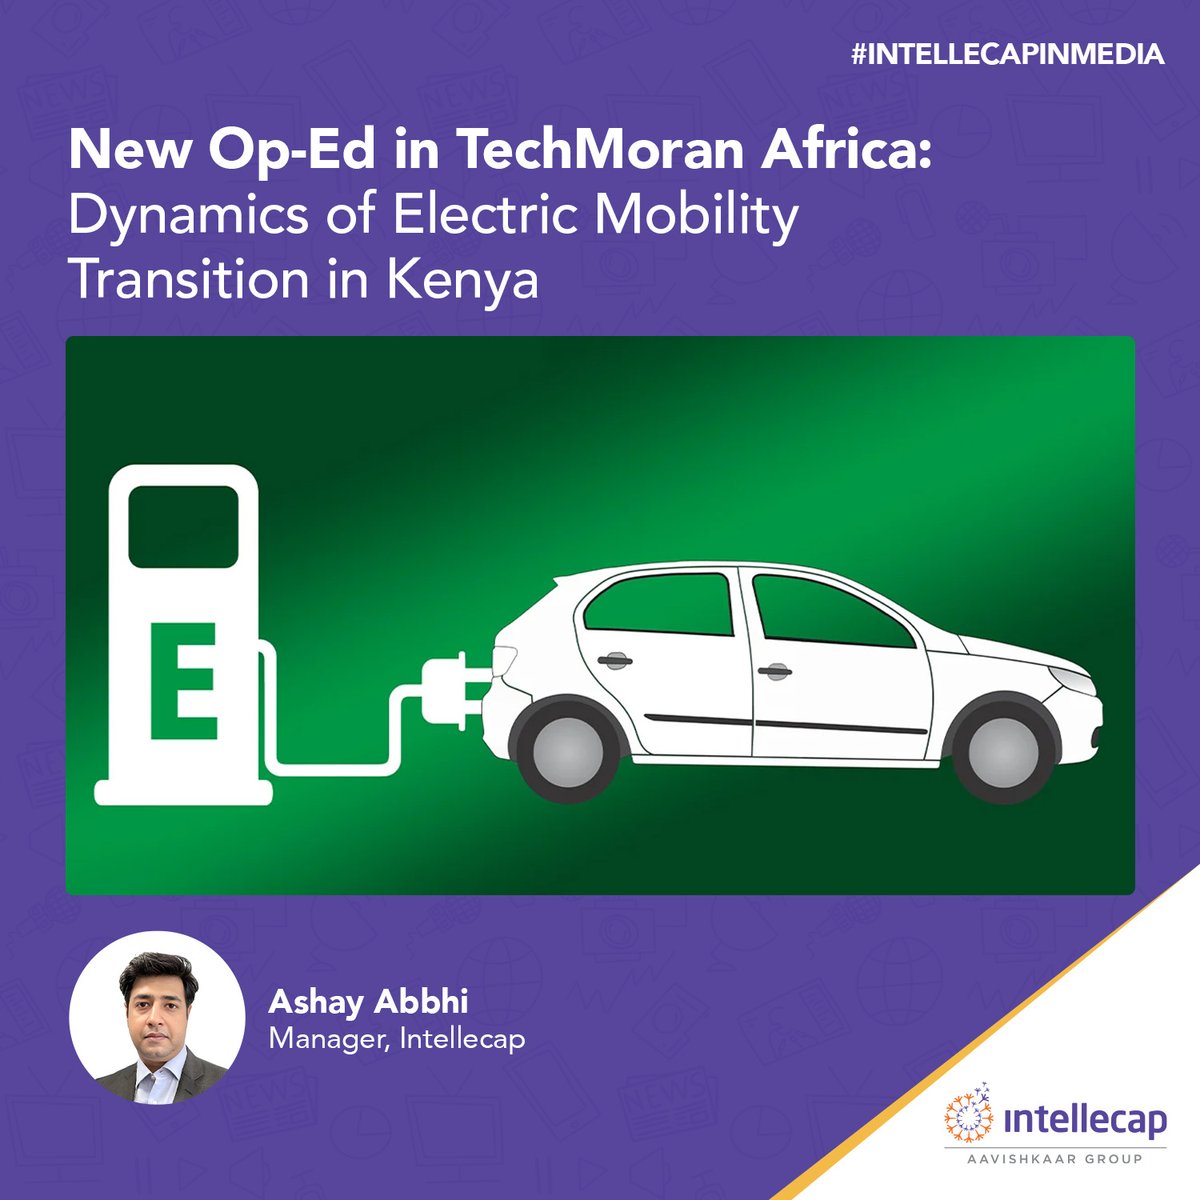 #freshoffthepress Intellecap's latest #oped by Ashay Abbhi sheds light on the current landscape for the electric mobility transition in Kenya. Click here to read the full article: ow.ly/Utuc50RuOzs #intellecapafrica #intellecapinmedia